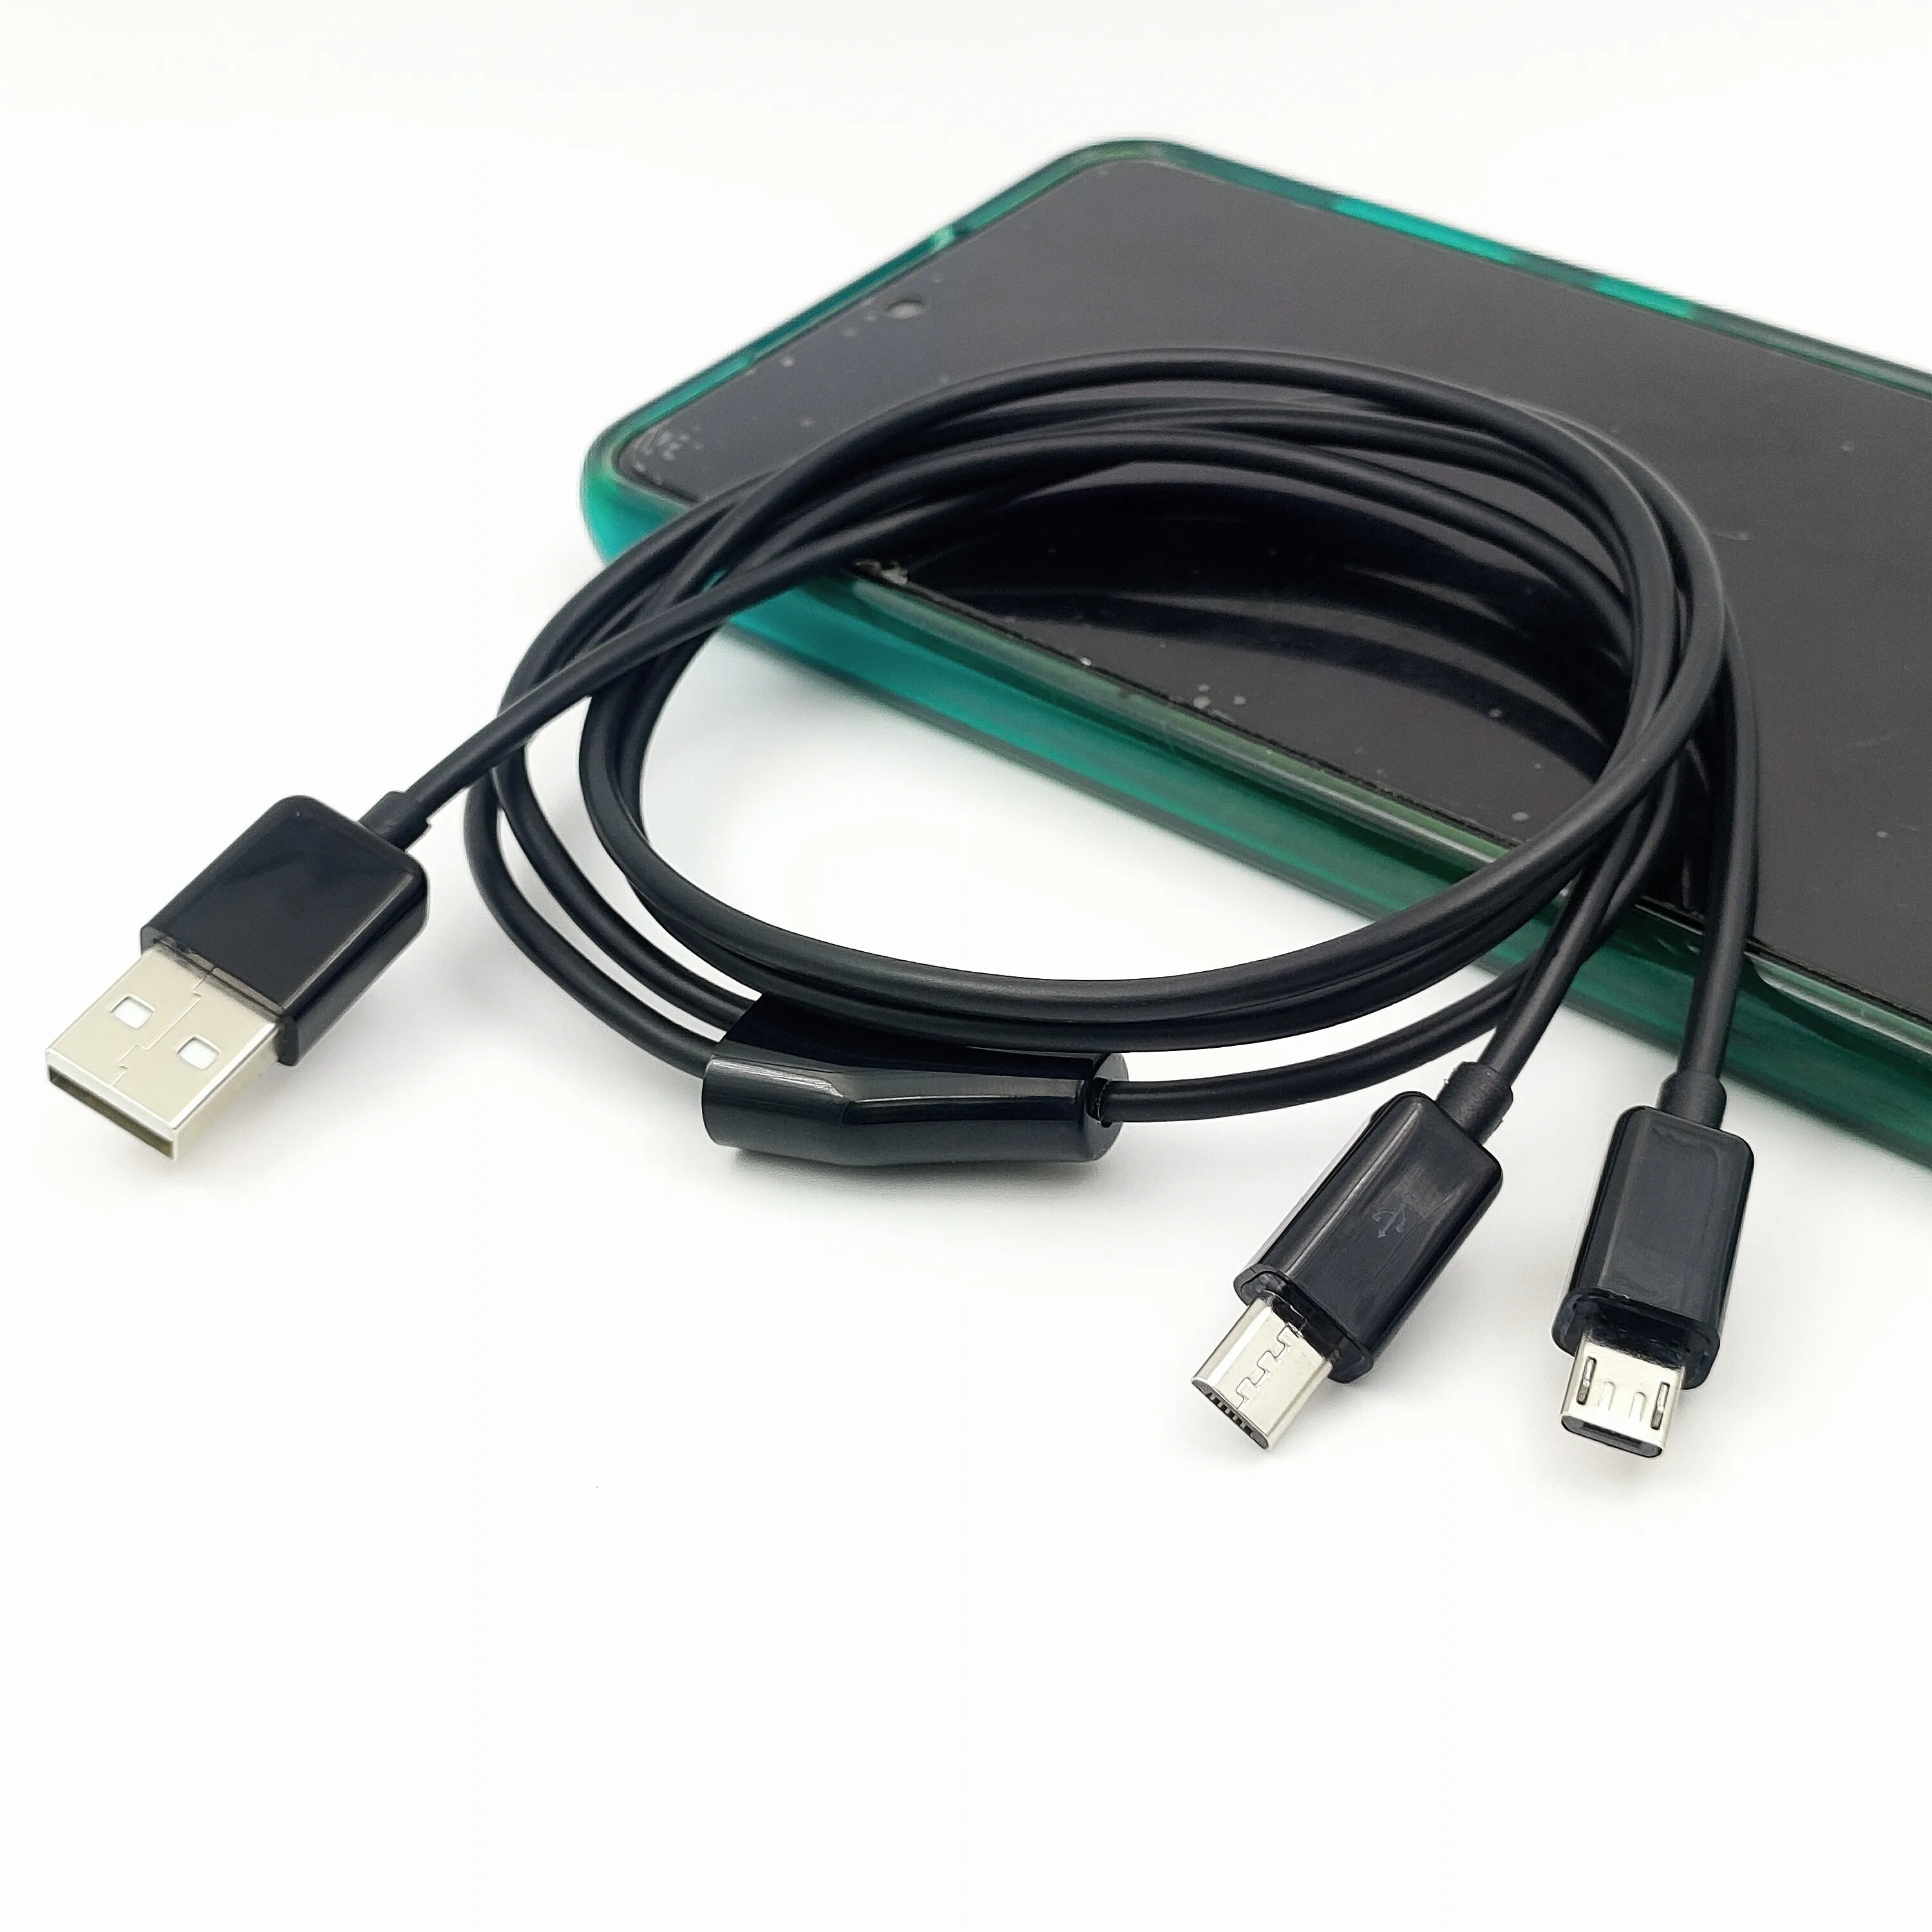 1m 3ft Dual Micro USB Splitter Cable with 8mm long tip Power 2 Micro USB Devices At Once